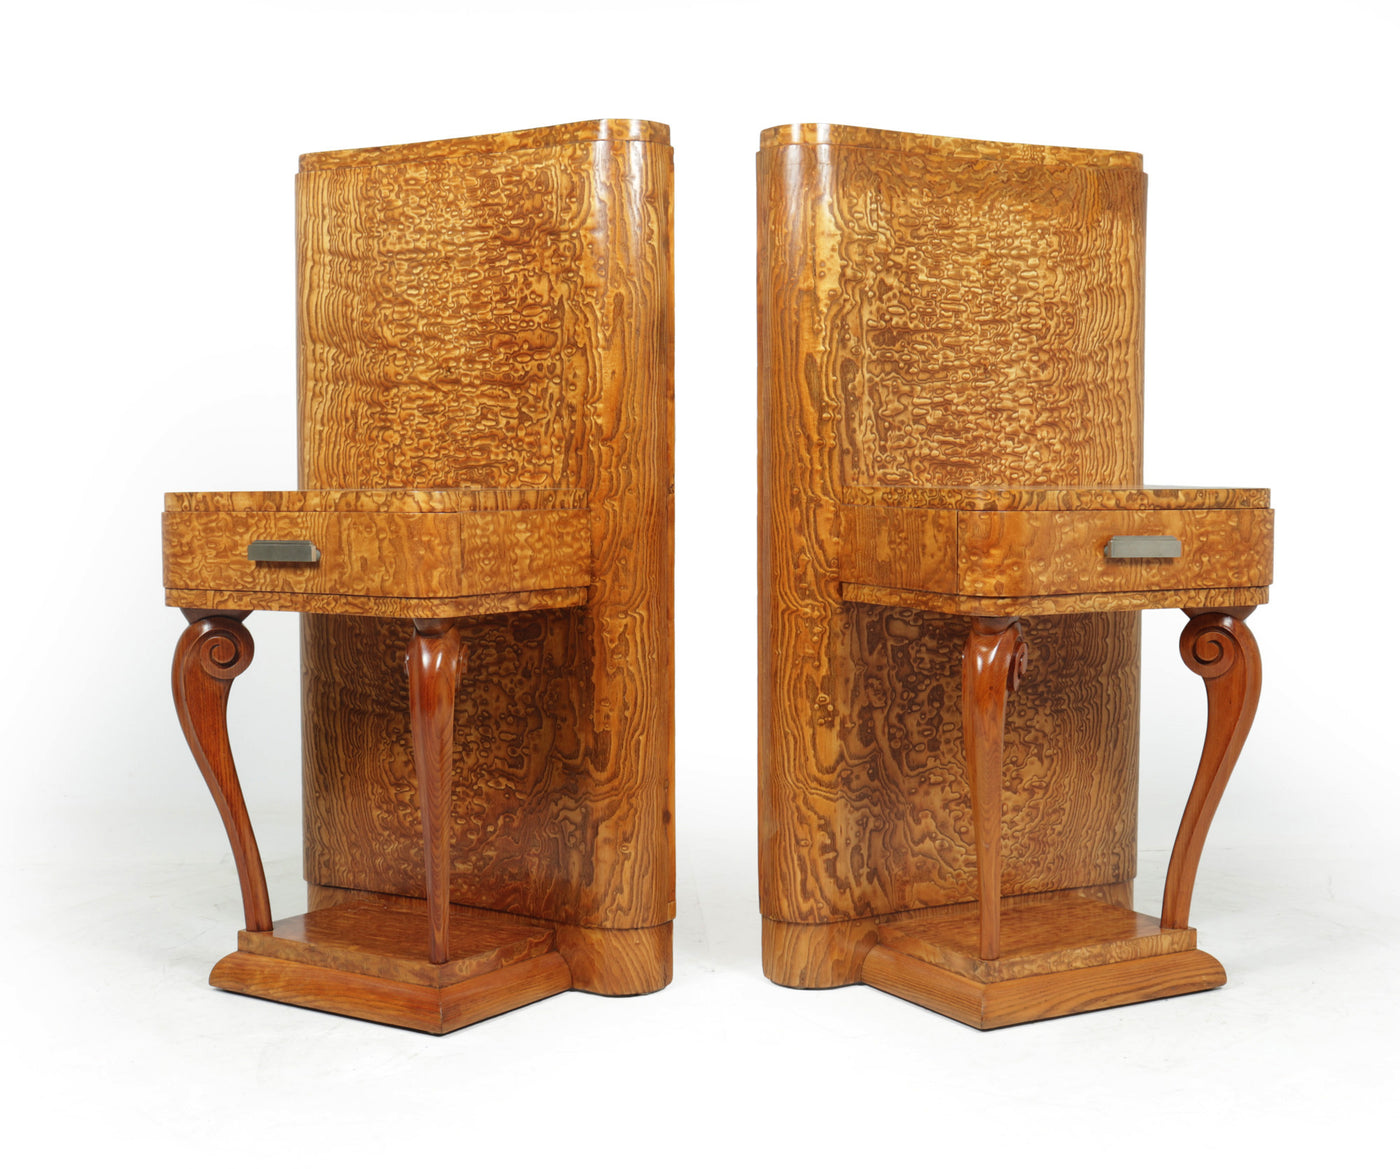 Pair of Art Deco Bedsides in Kato Ash